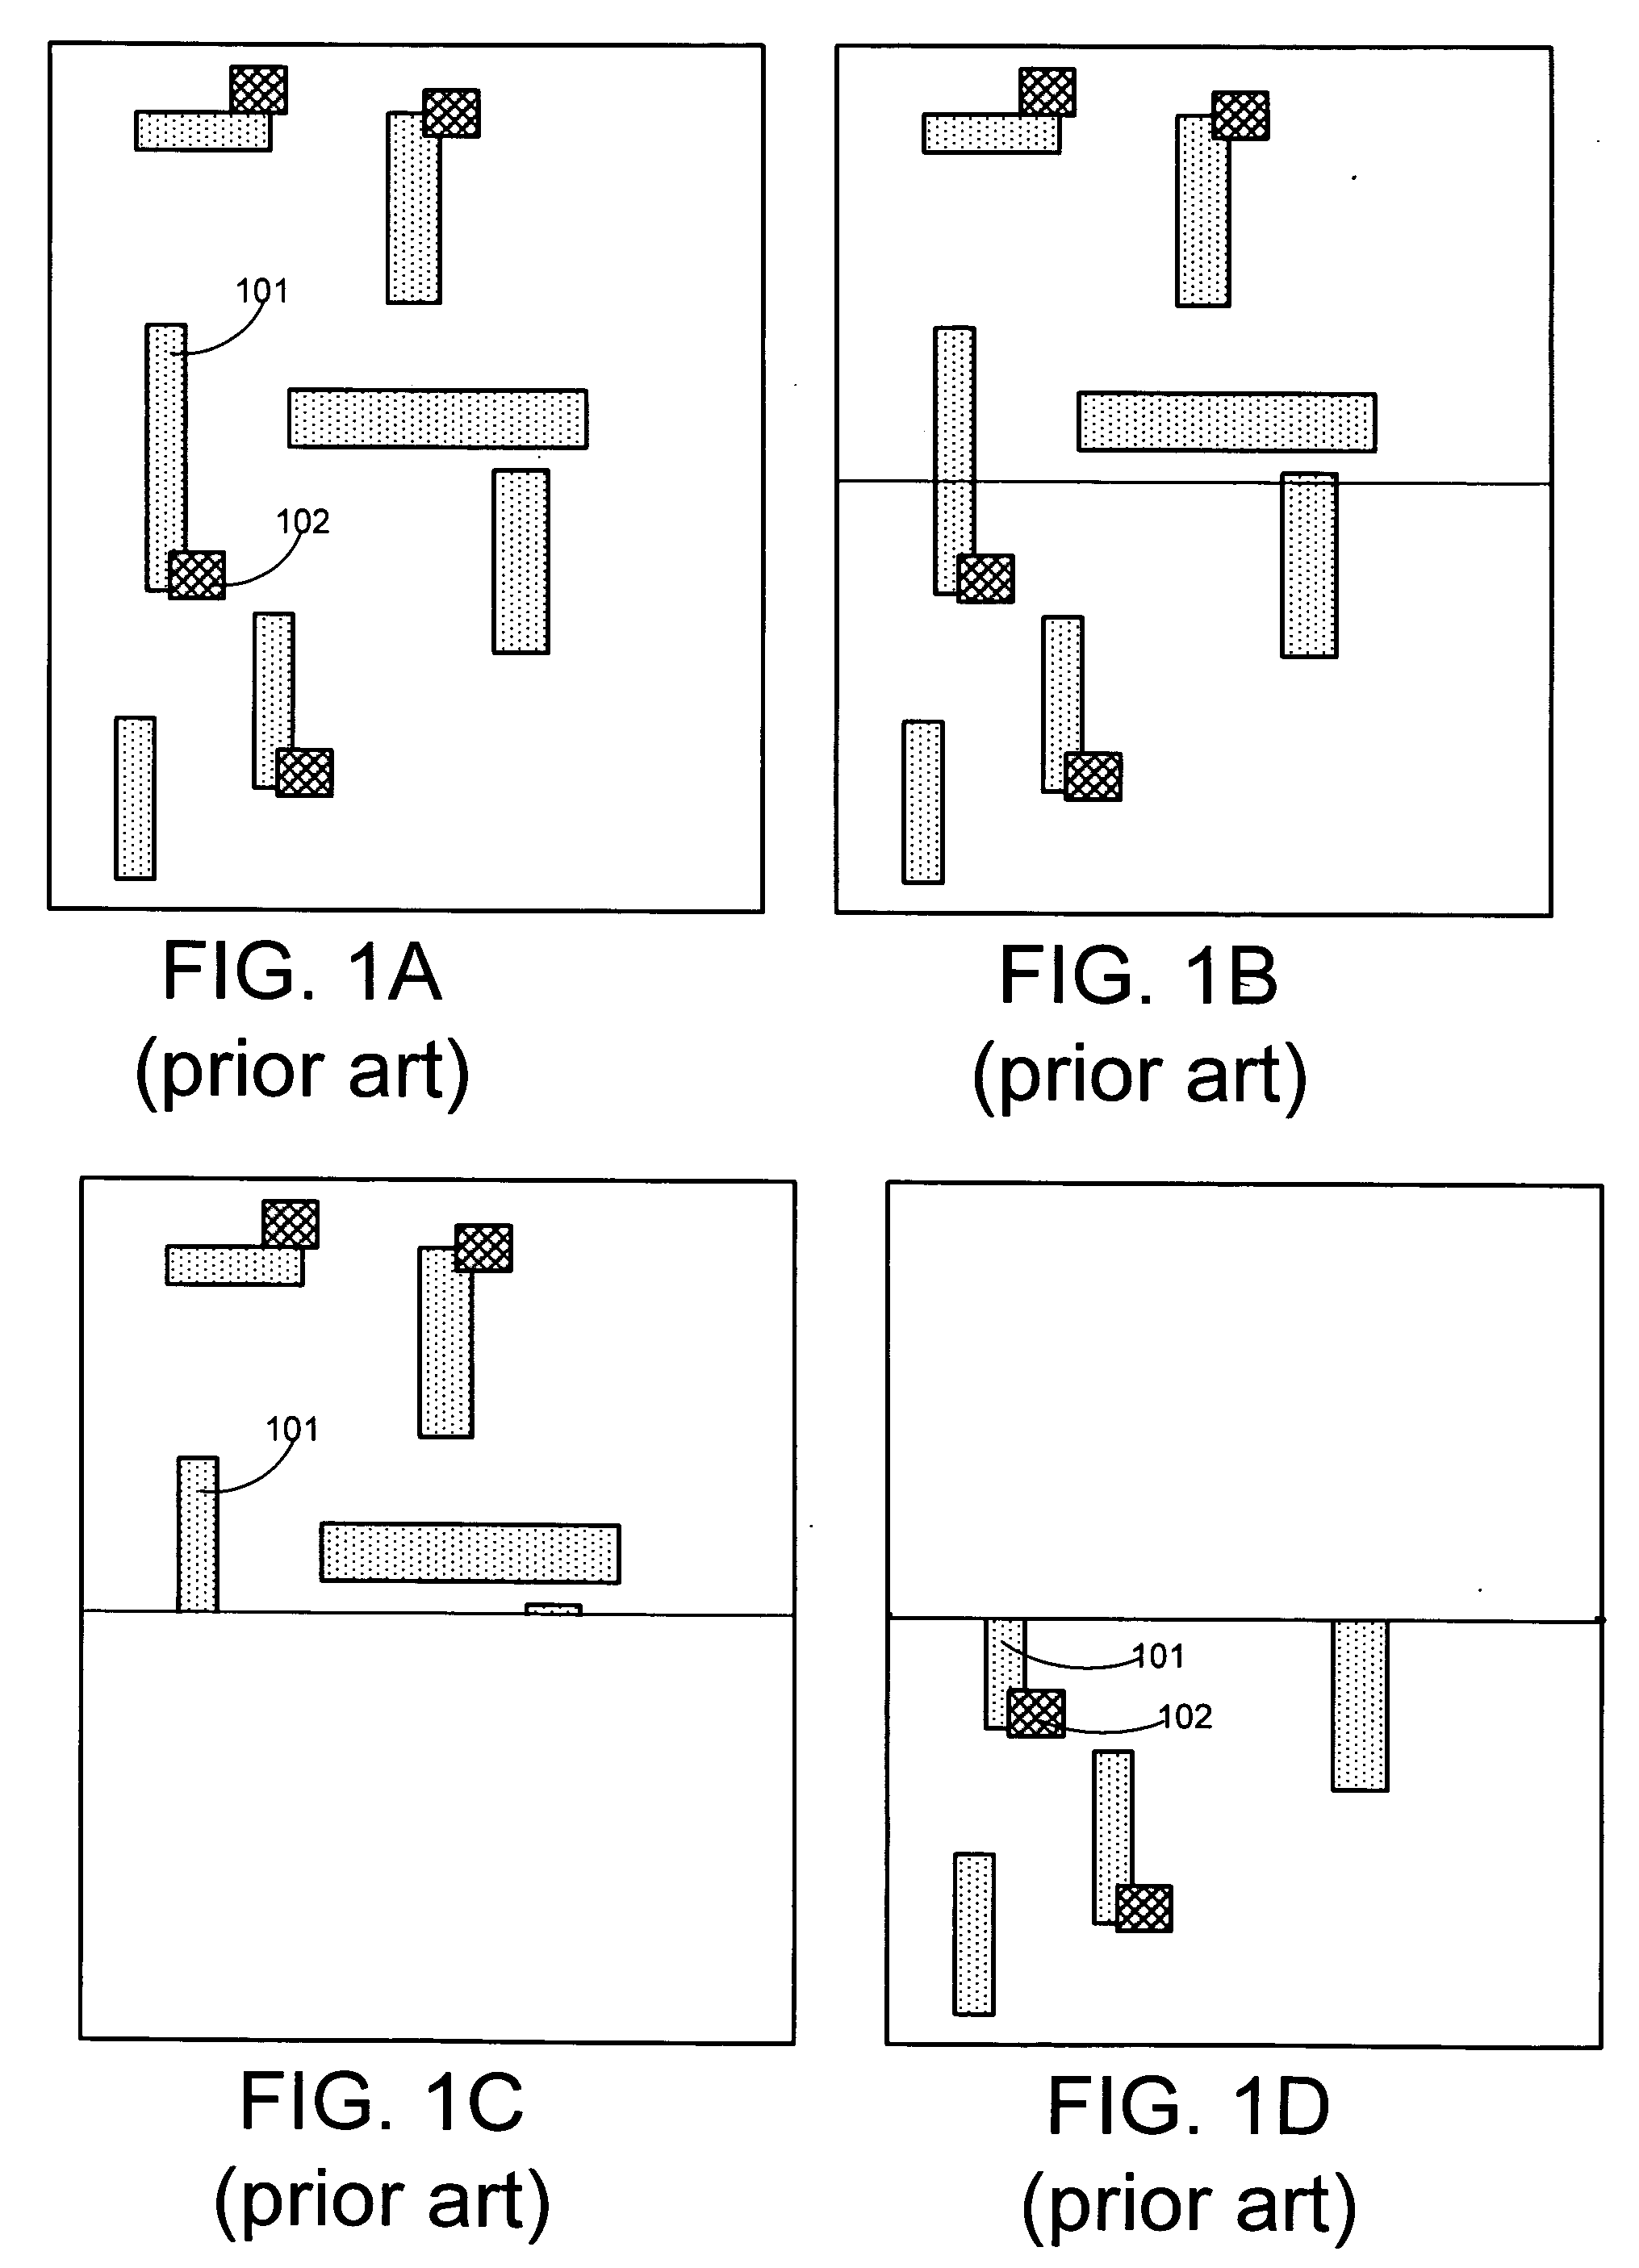 Verifying an IC layout in individual regions and combining results